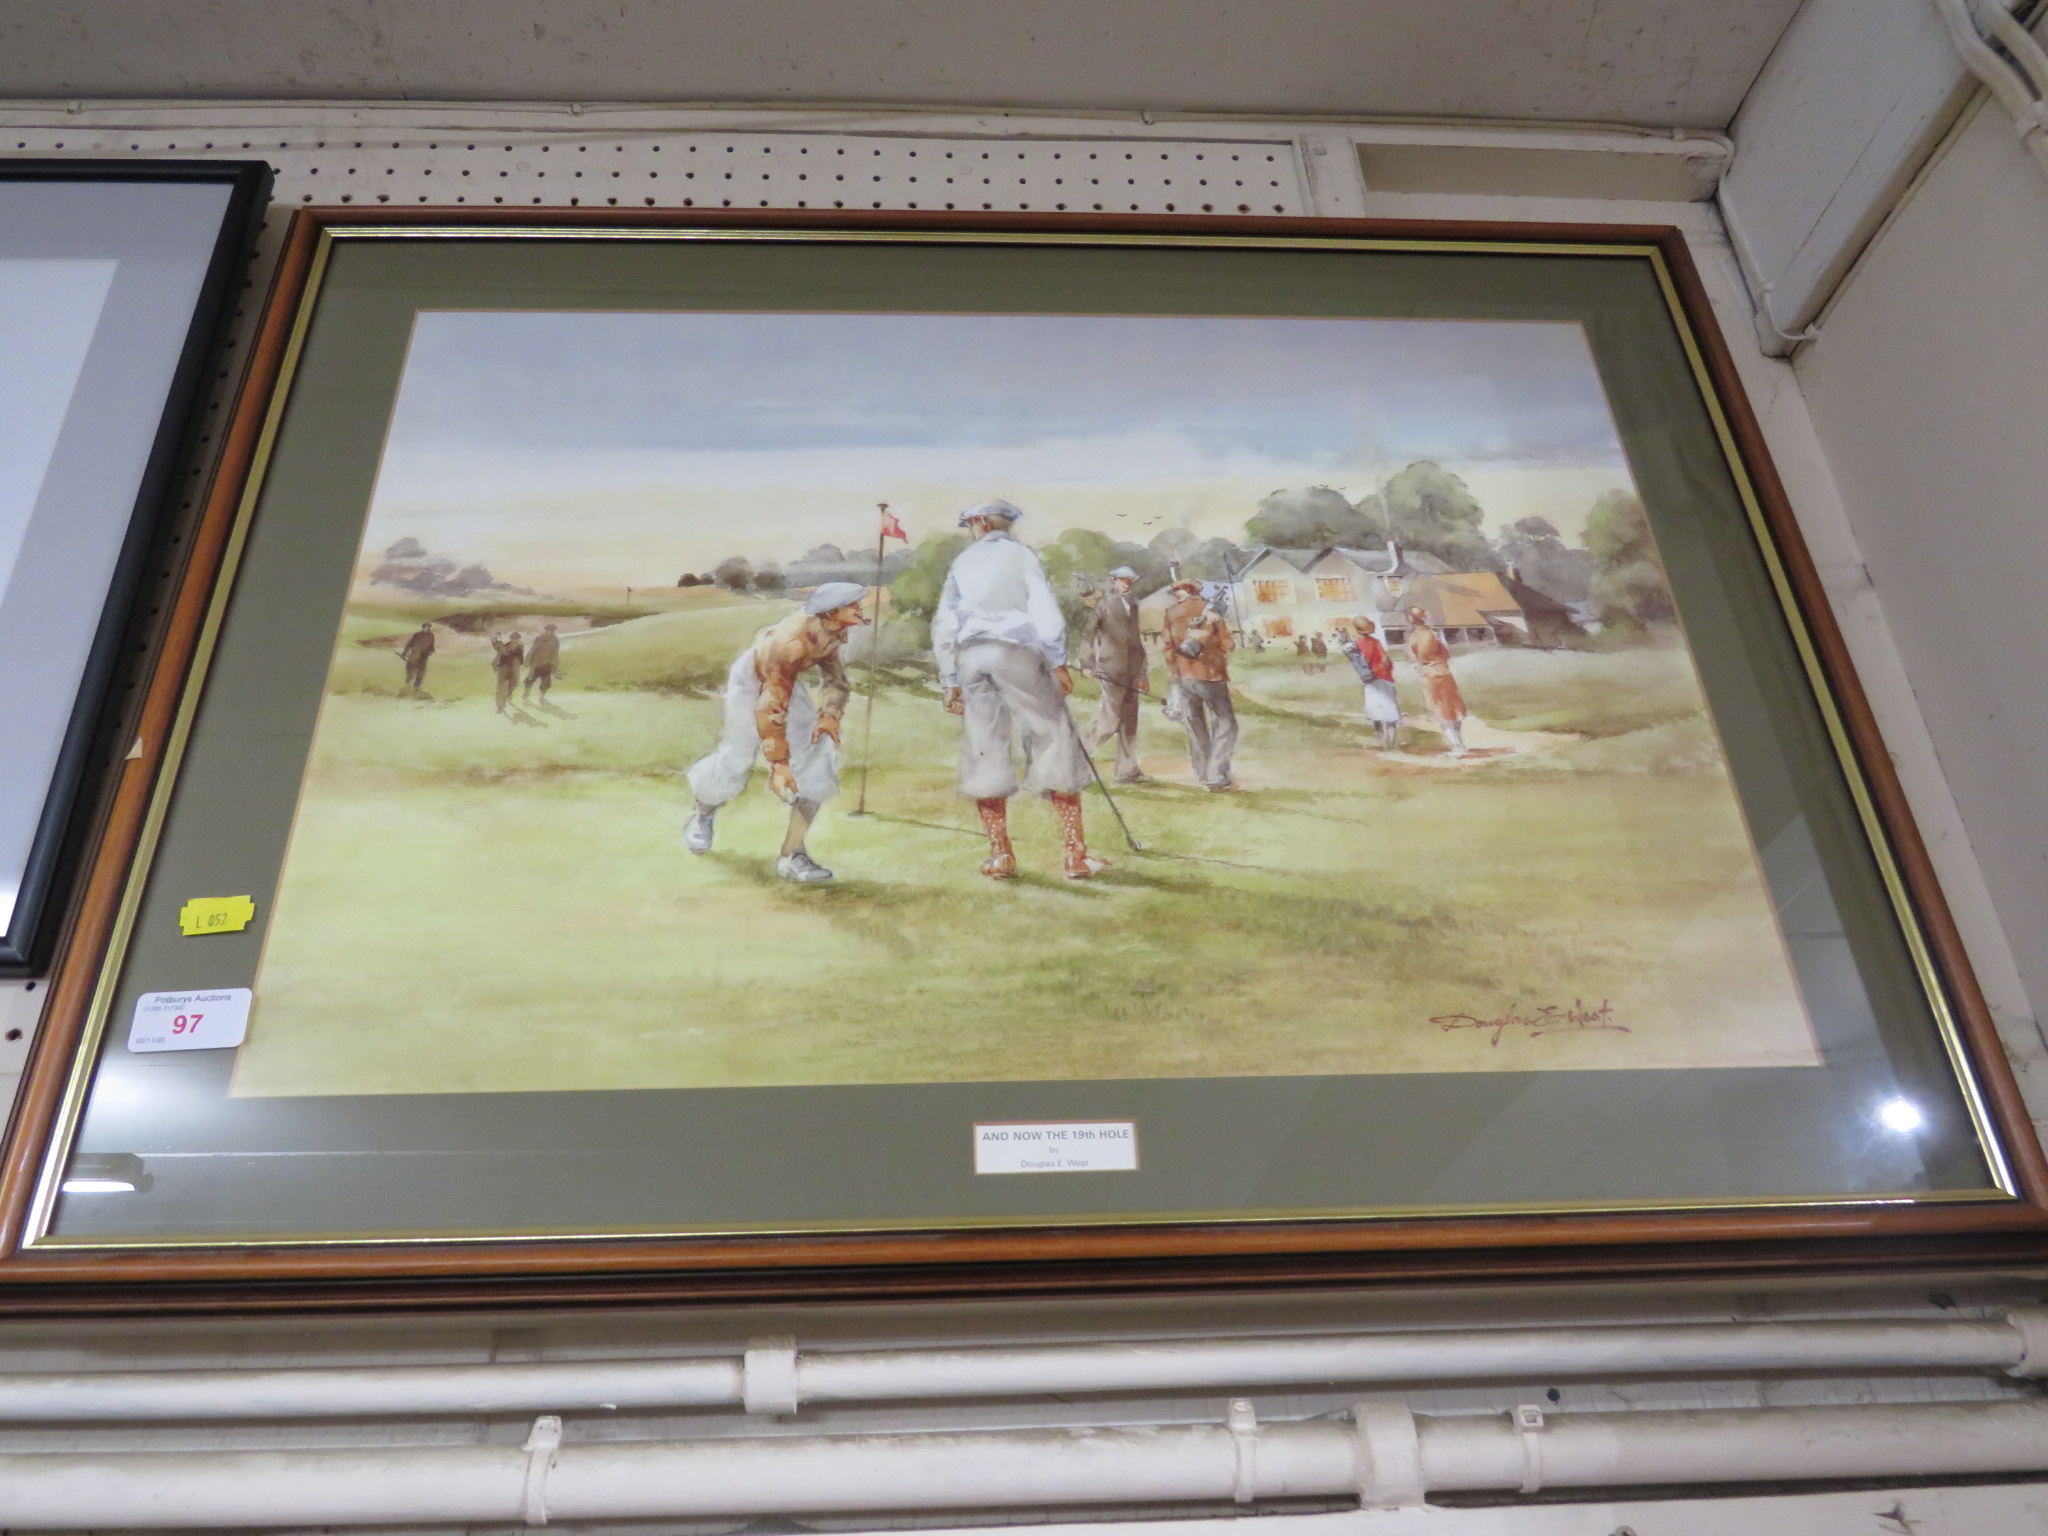 FRAMED AND GLAZED COLOURED PRINT AFTER DOUGLAS E WEST TITLED 'AND NOW THE NINETEENTH HOLE'